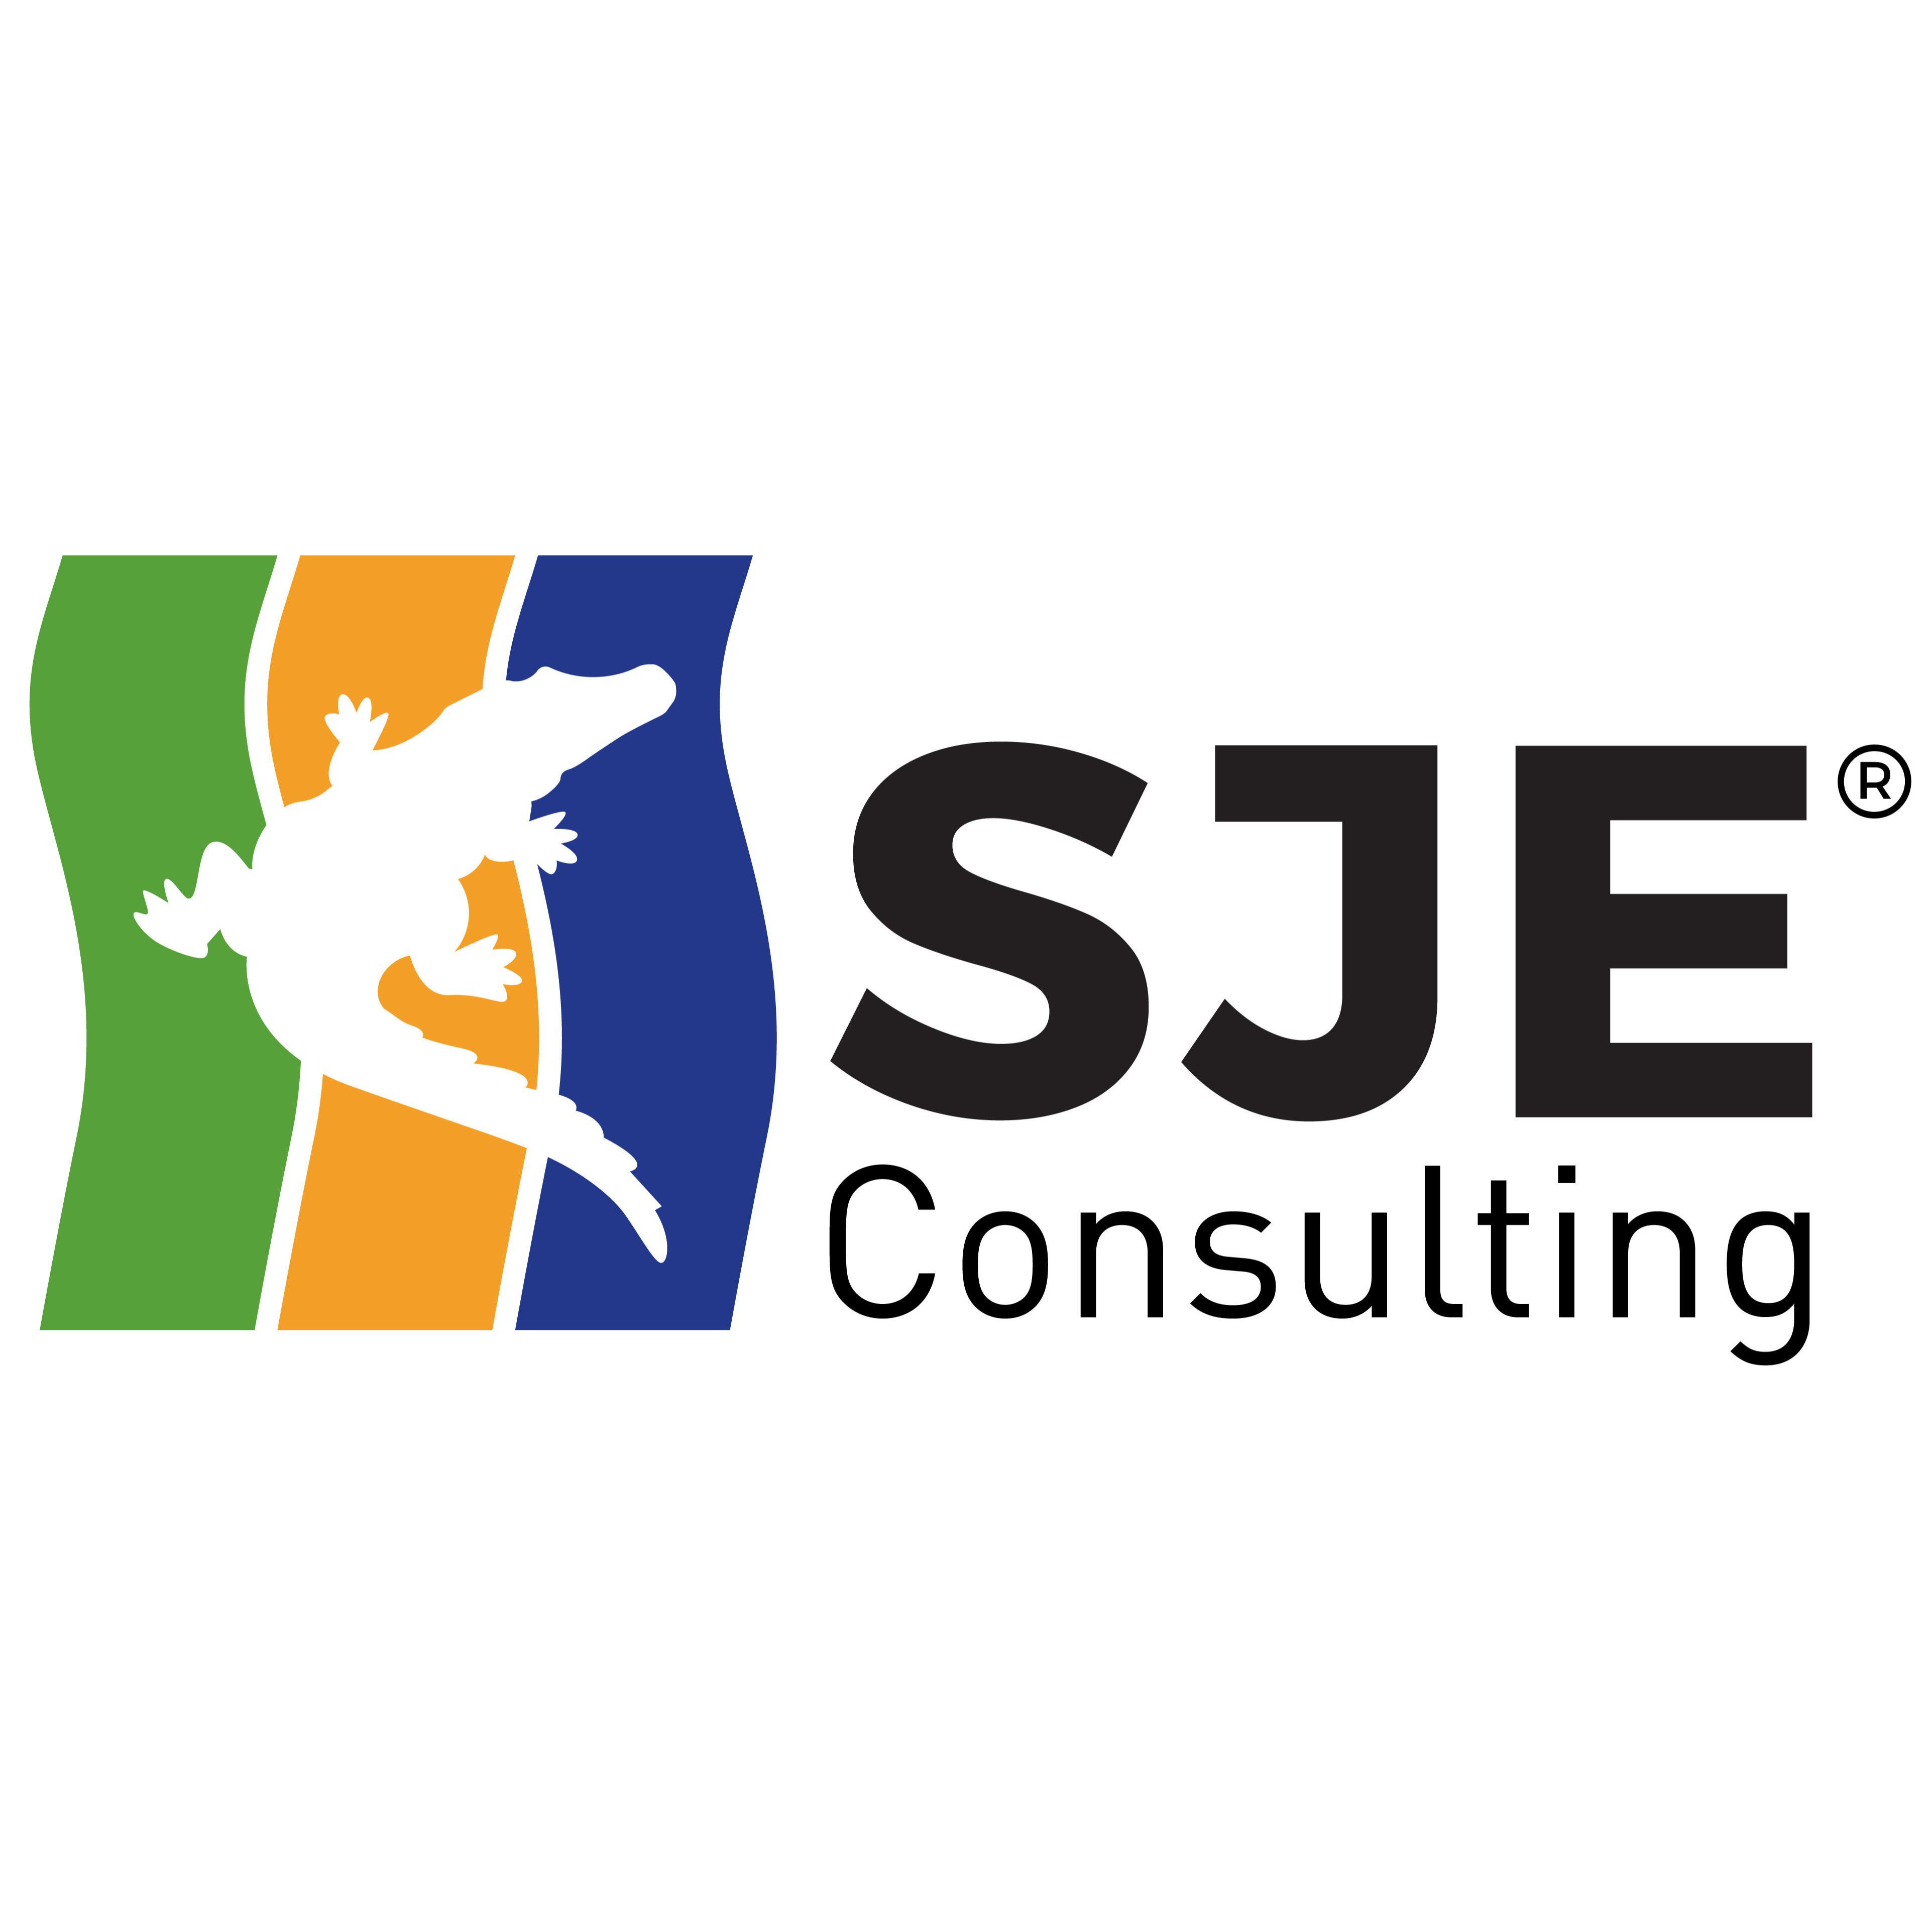 SJE Consulting Engineers - South Albury, NSW 2640 - (02) 6021 7233 | ShowMeLocal.com